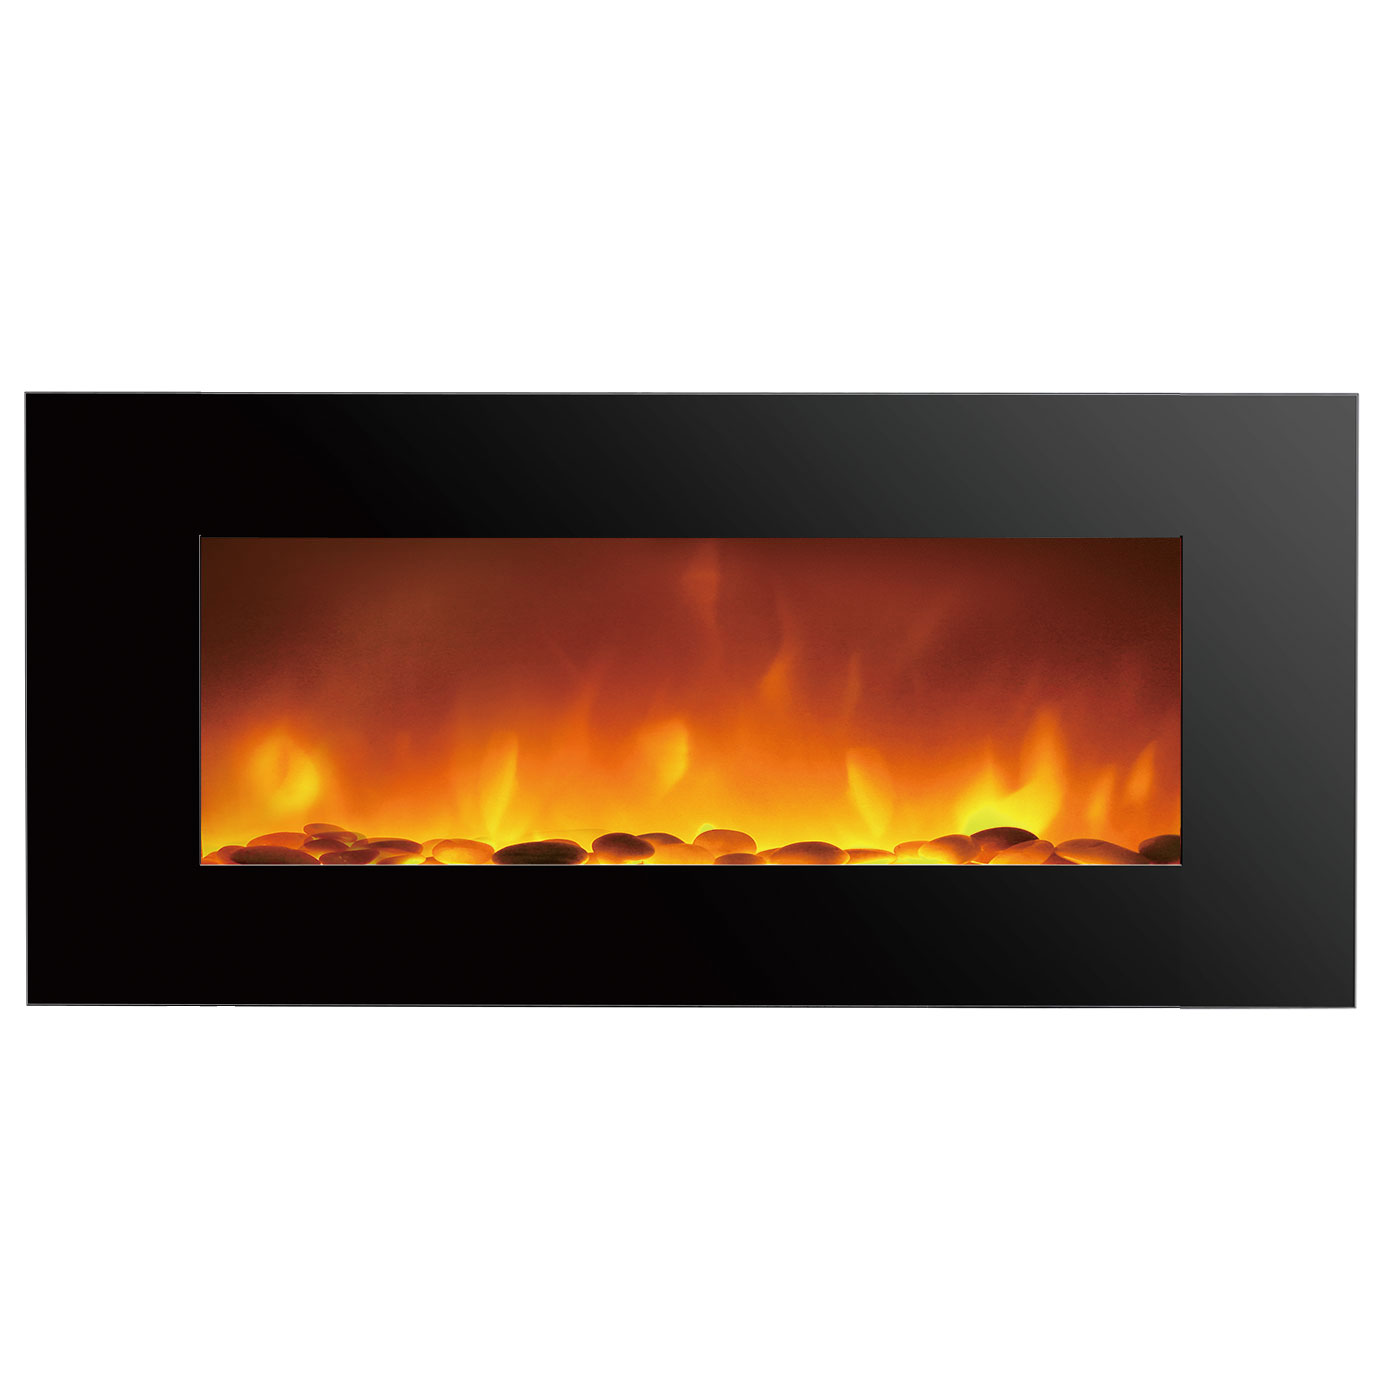 48"LONG SIZE WALL MOUNTED FIREPLACE WITH REMOTE CONTROL